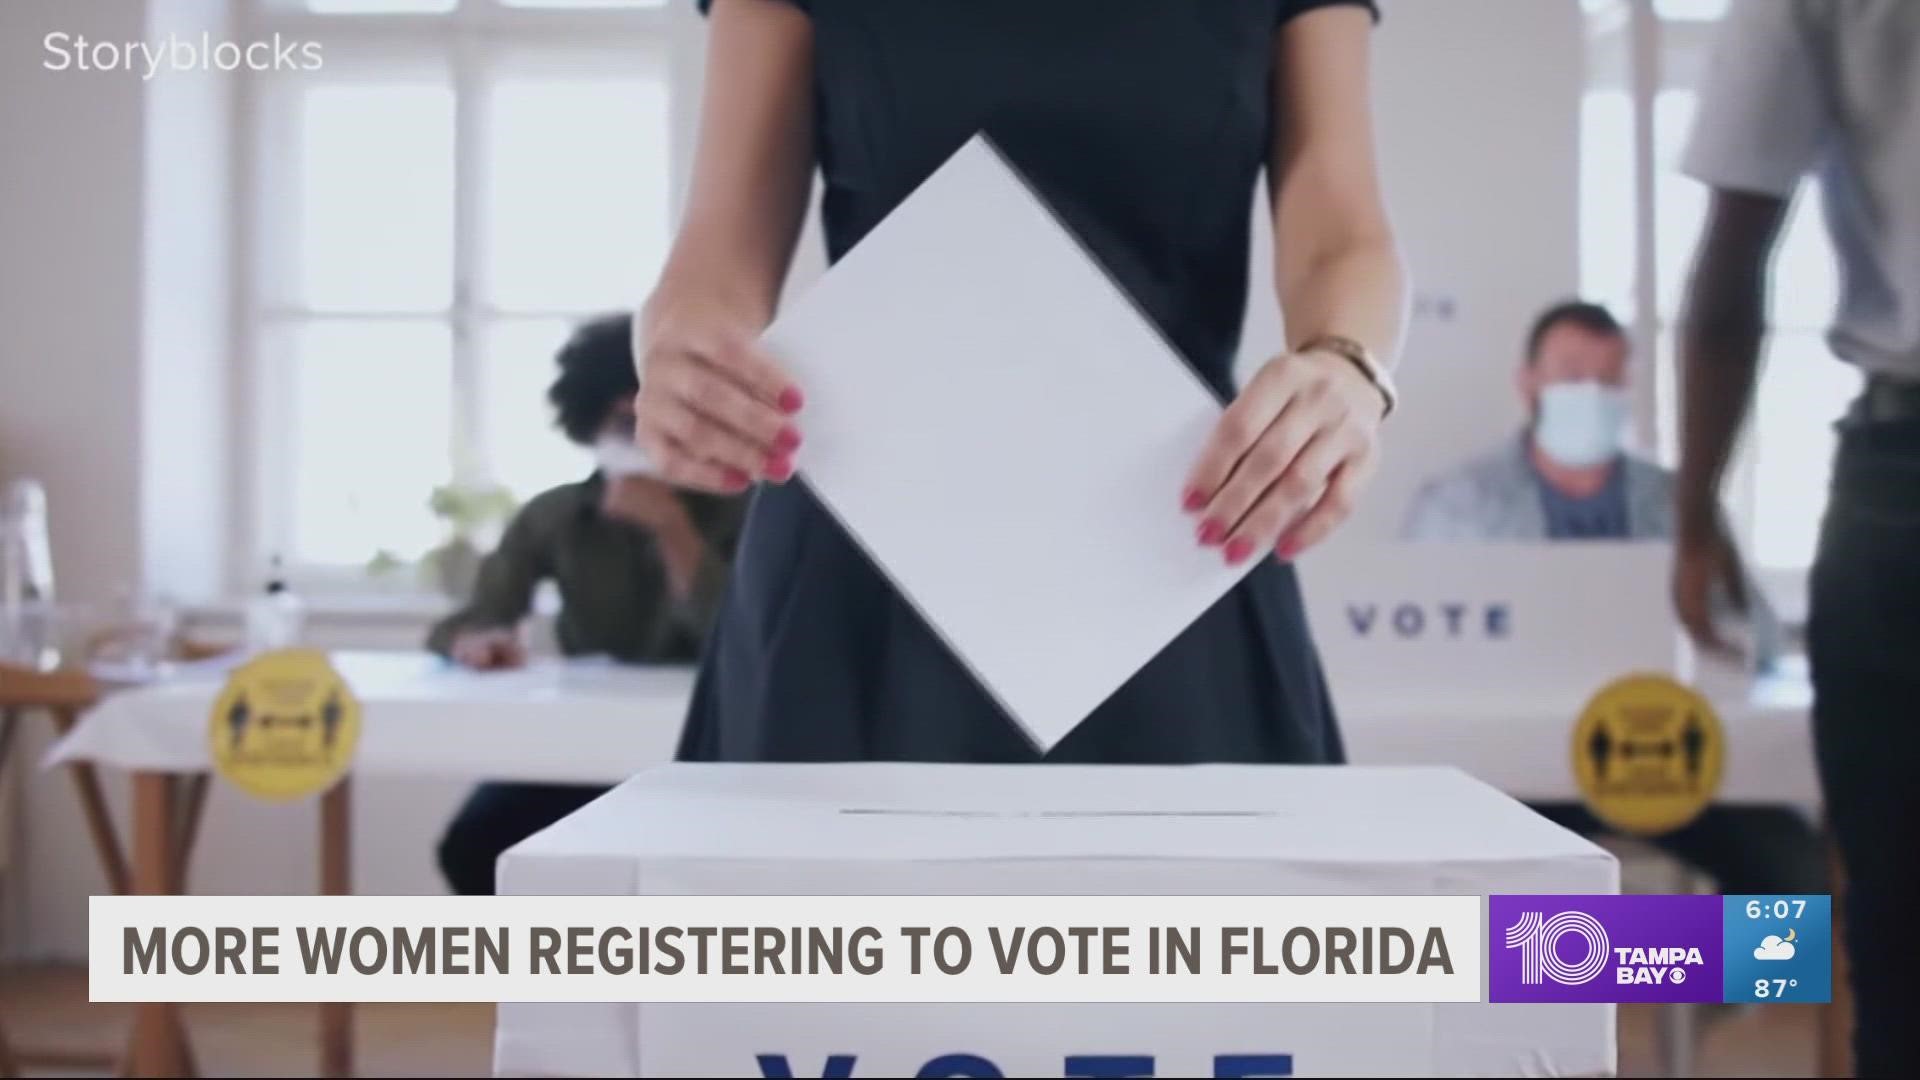 Of new people added to the voter rolls, women lead men by 4%. It might not sound like much, but Florida has very close elections.